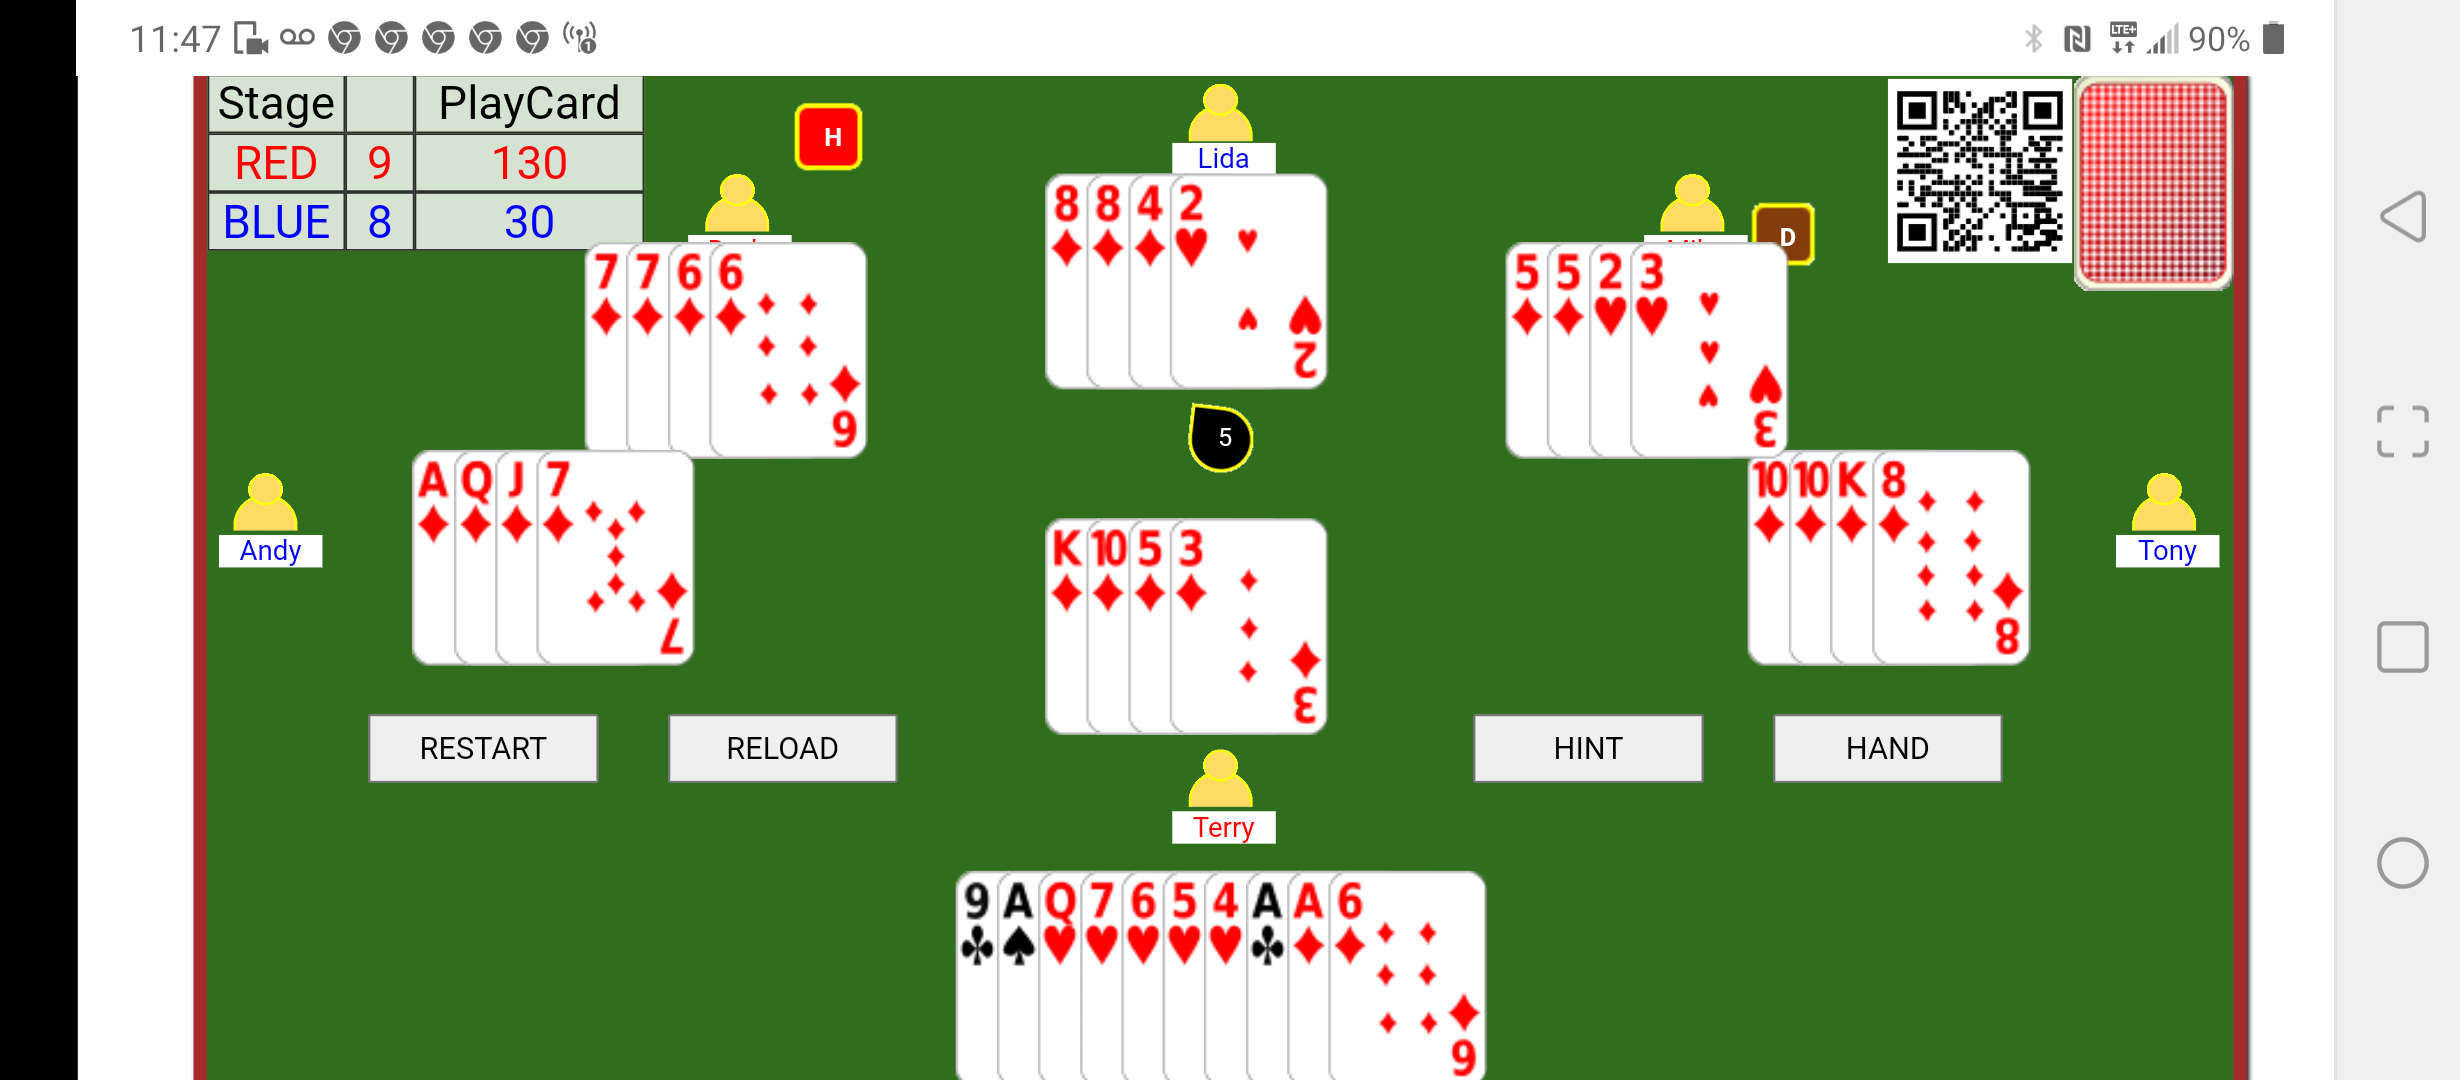 html5 tractor card game Screenshot_20220120-114739.png